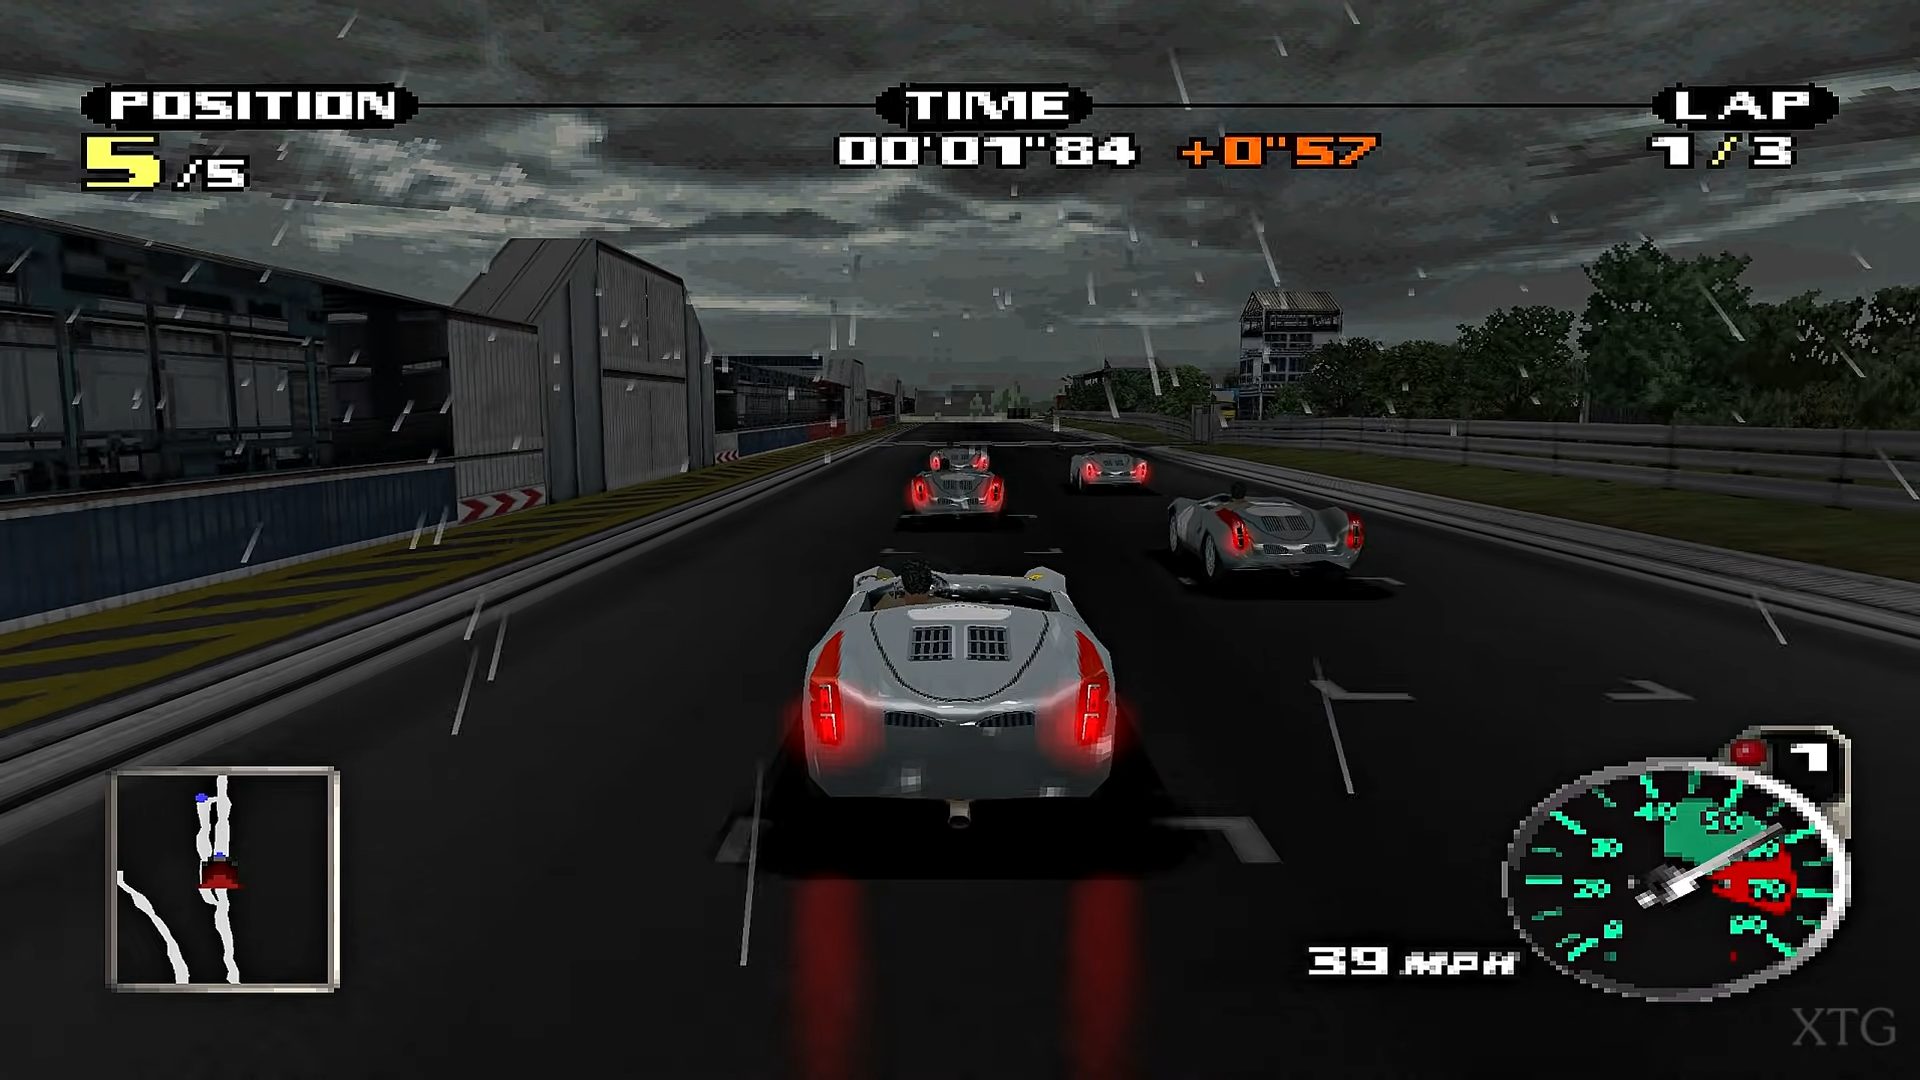 NEED FOR SPEED PORSCHE UNLEASED (PLAYSTATION CD-ROM DISC VERSION) (NEED FOR  SPEED PORSCHE UNLEASED (PLAYSTATION CD-ROM DISC VERSION), NEED FOR SPEED  PORSCHE UNLEASED (PLAYSTATION CD-ROM DISC VERSION)): SONY PLATSTION  VERSION: : Books